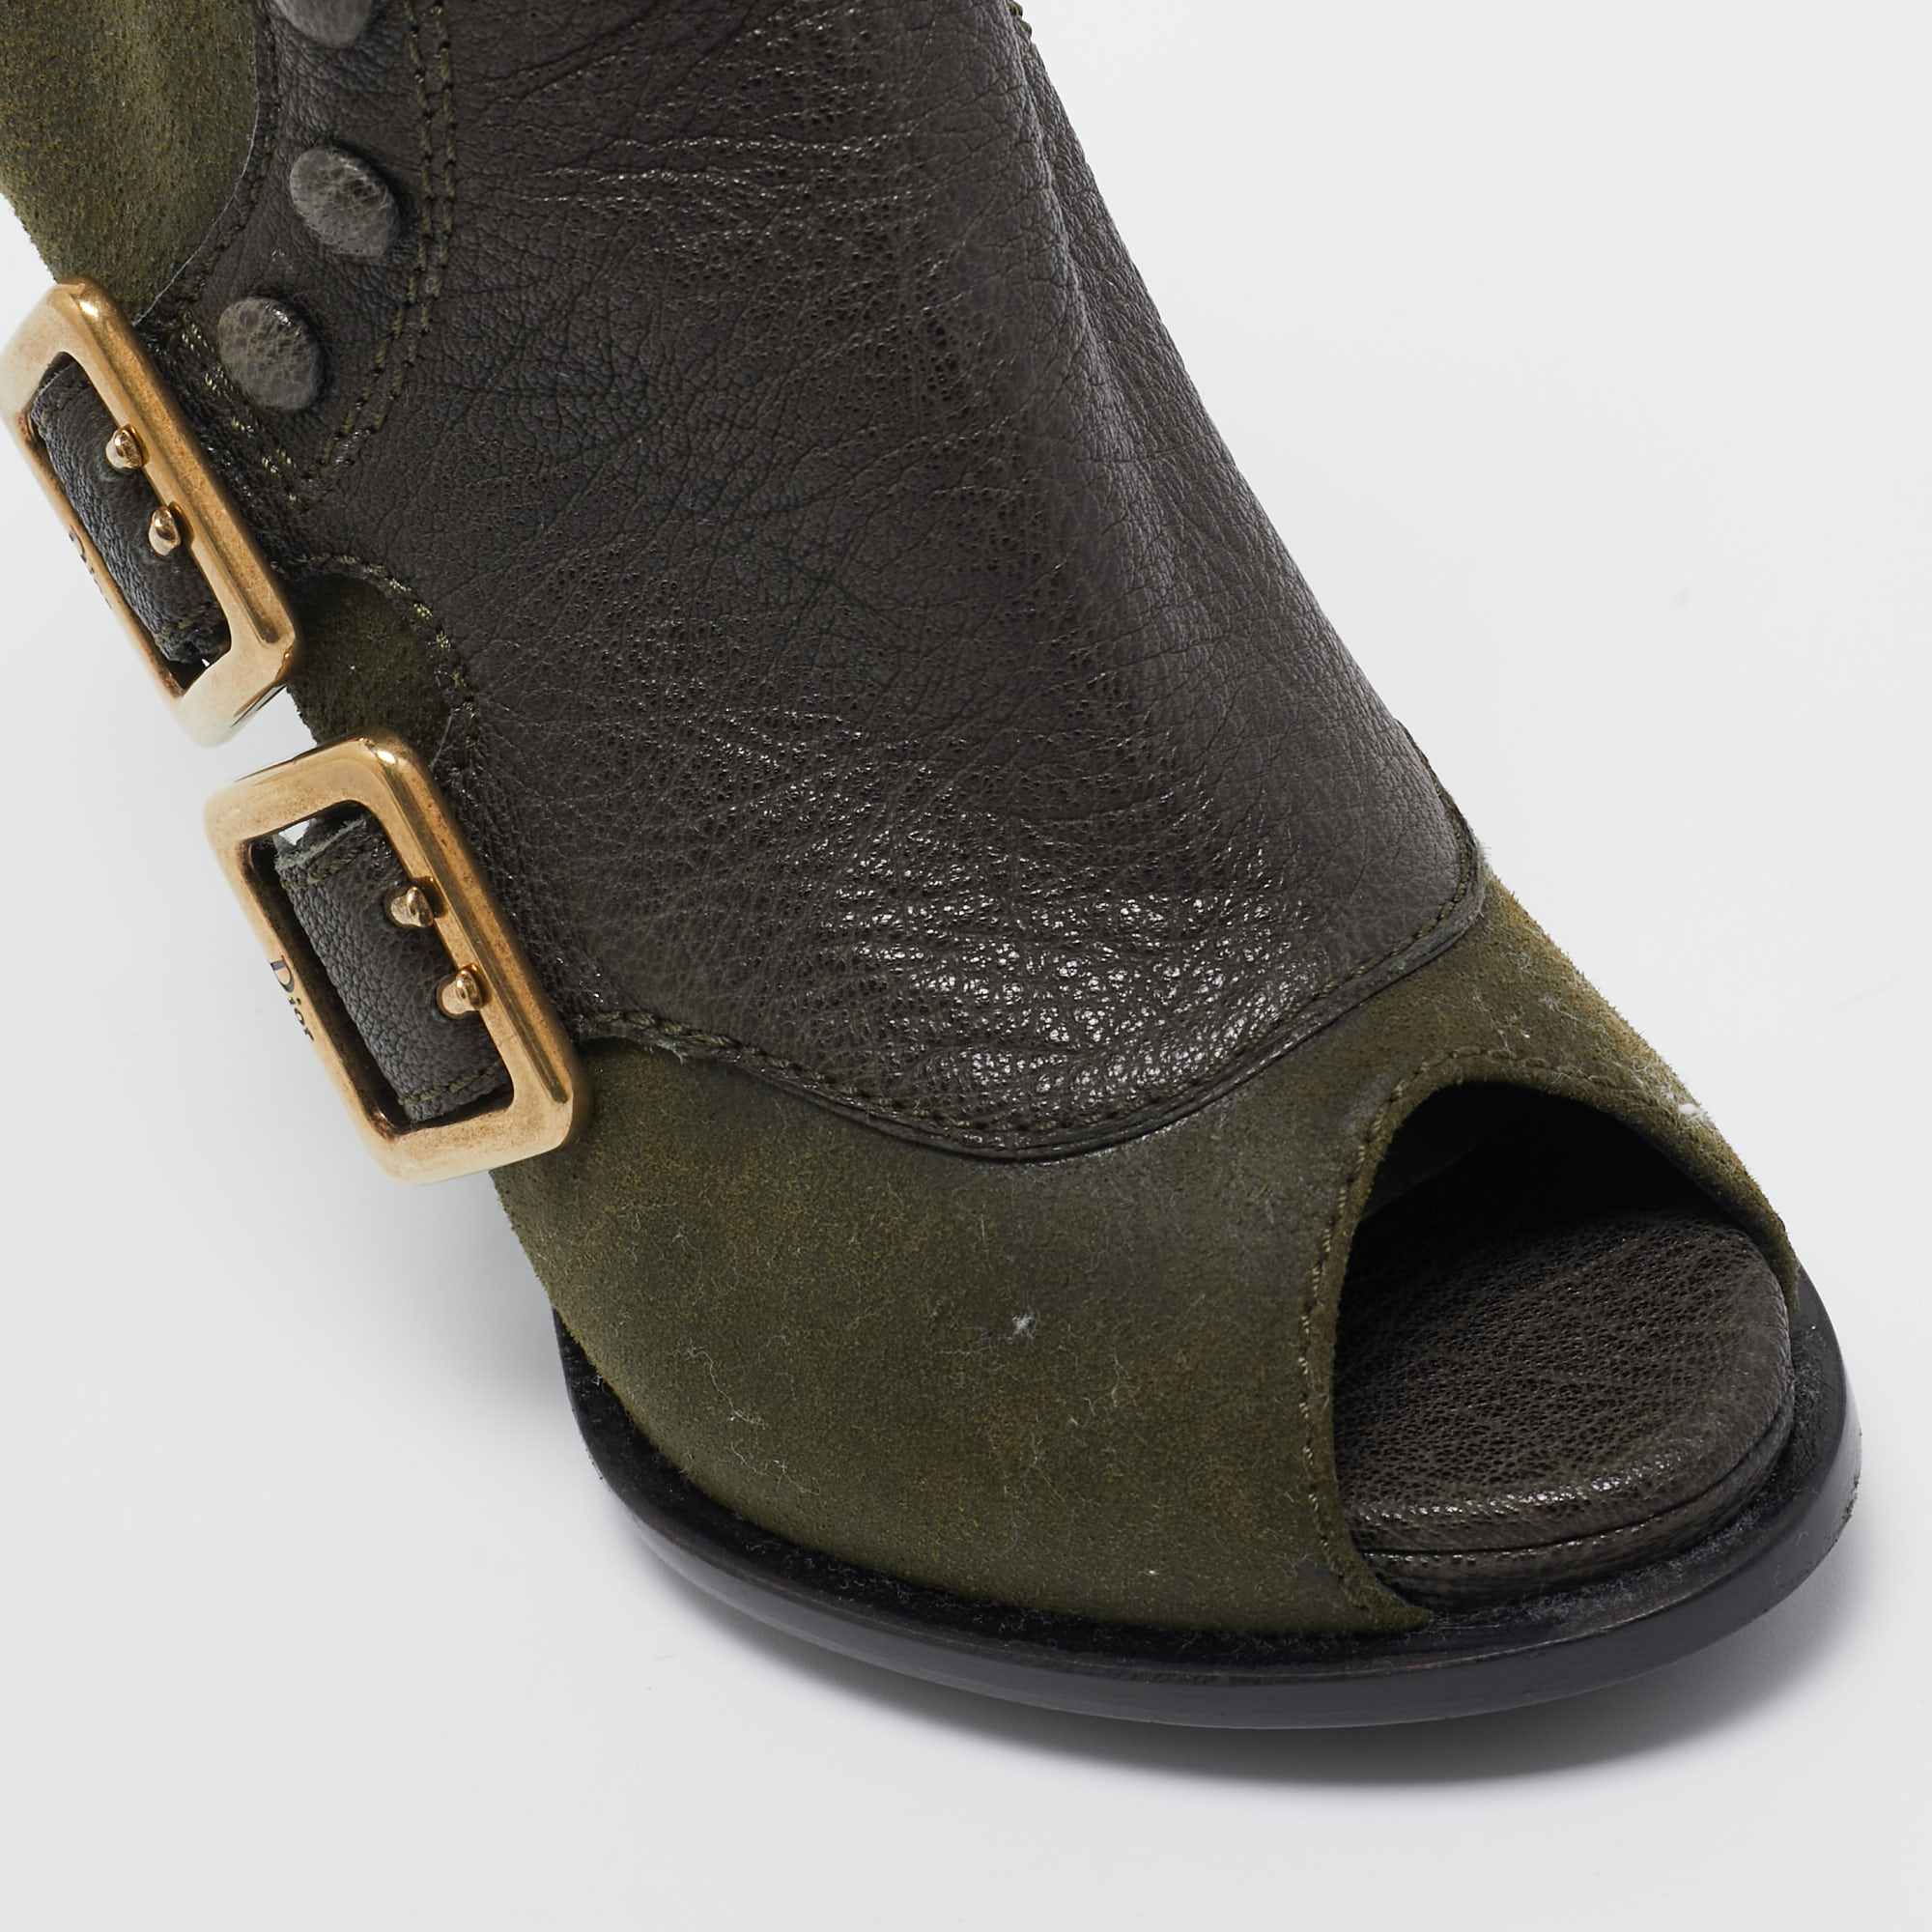 Dior Green Suede And Leather Peep Toe Ankle Boots Size 35.5